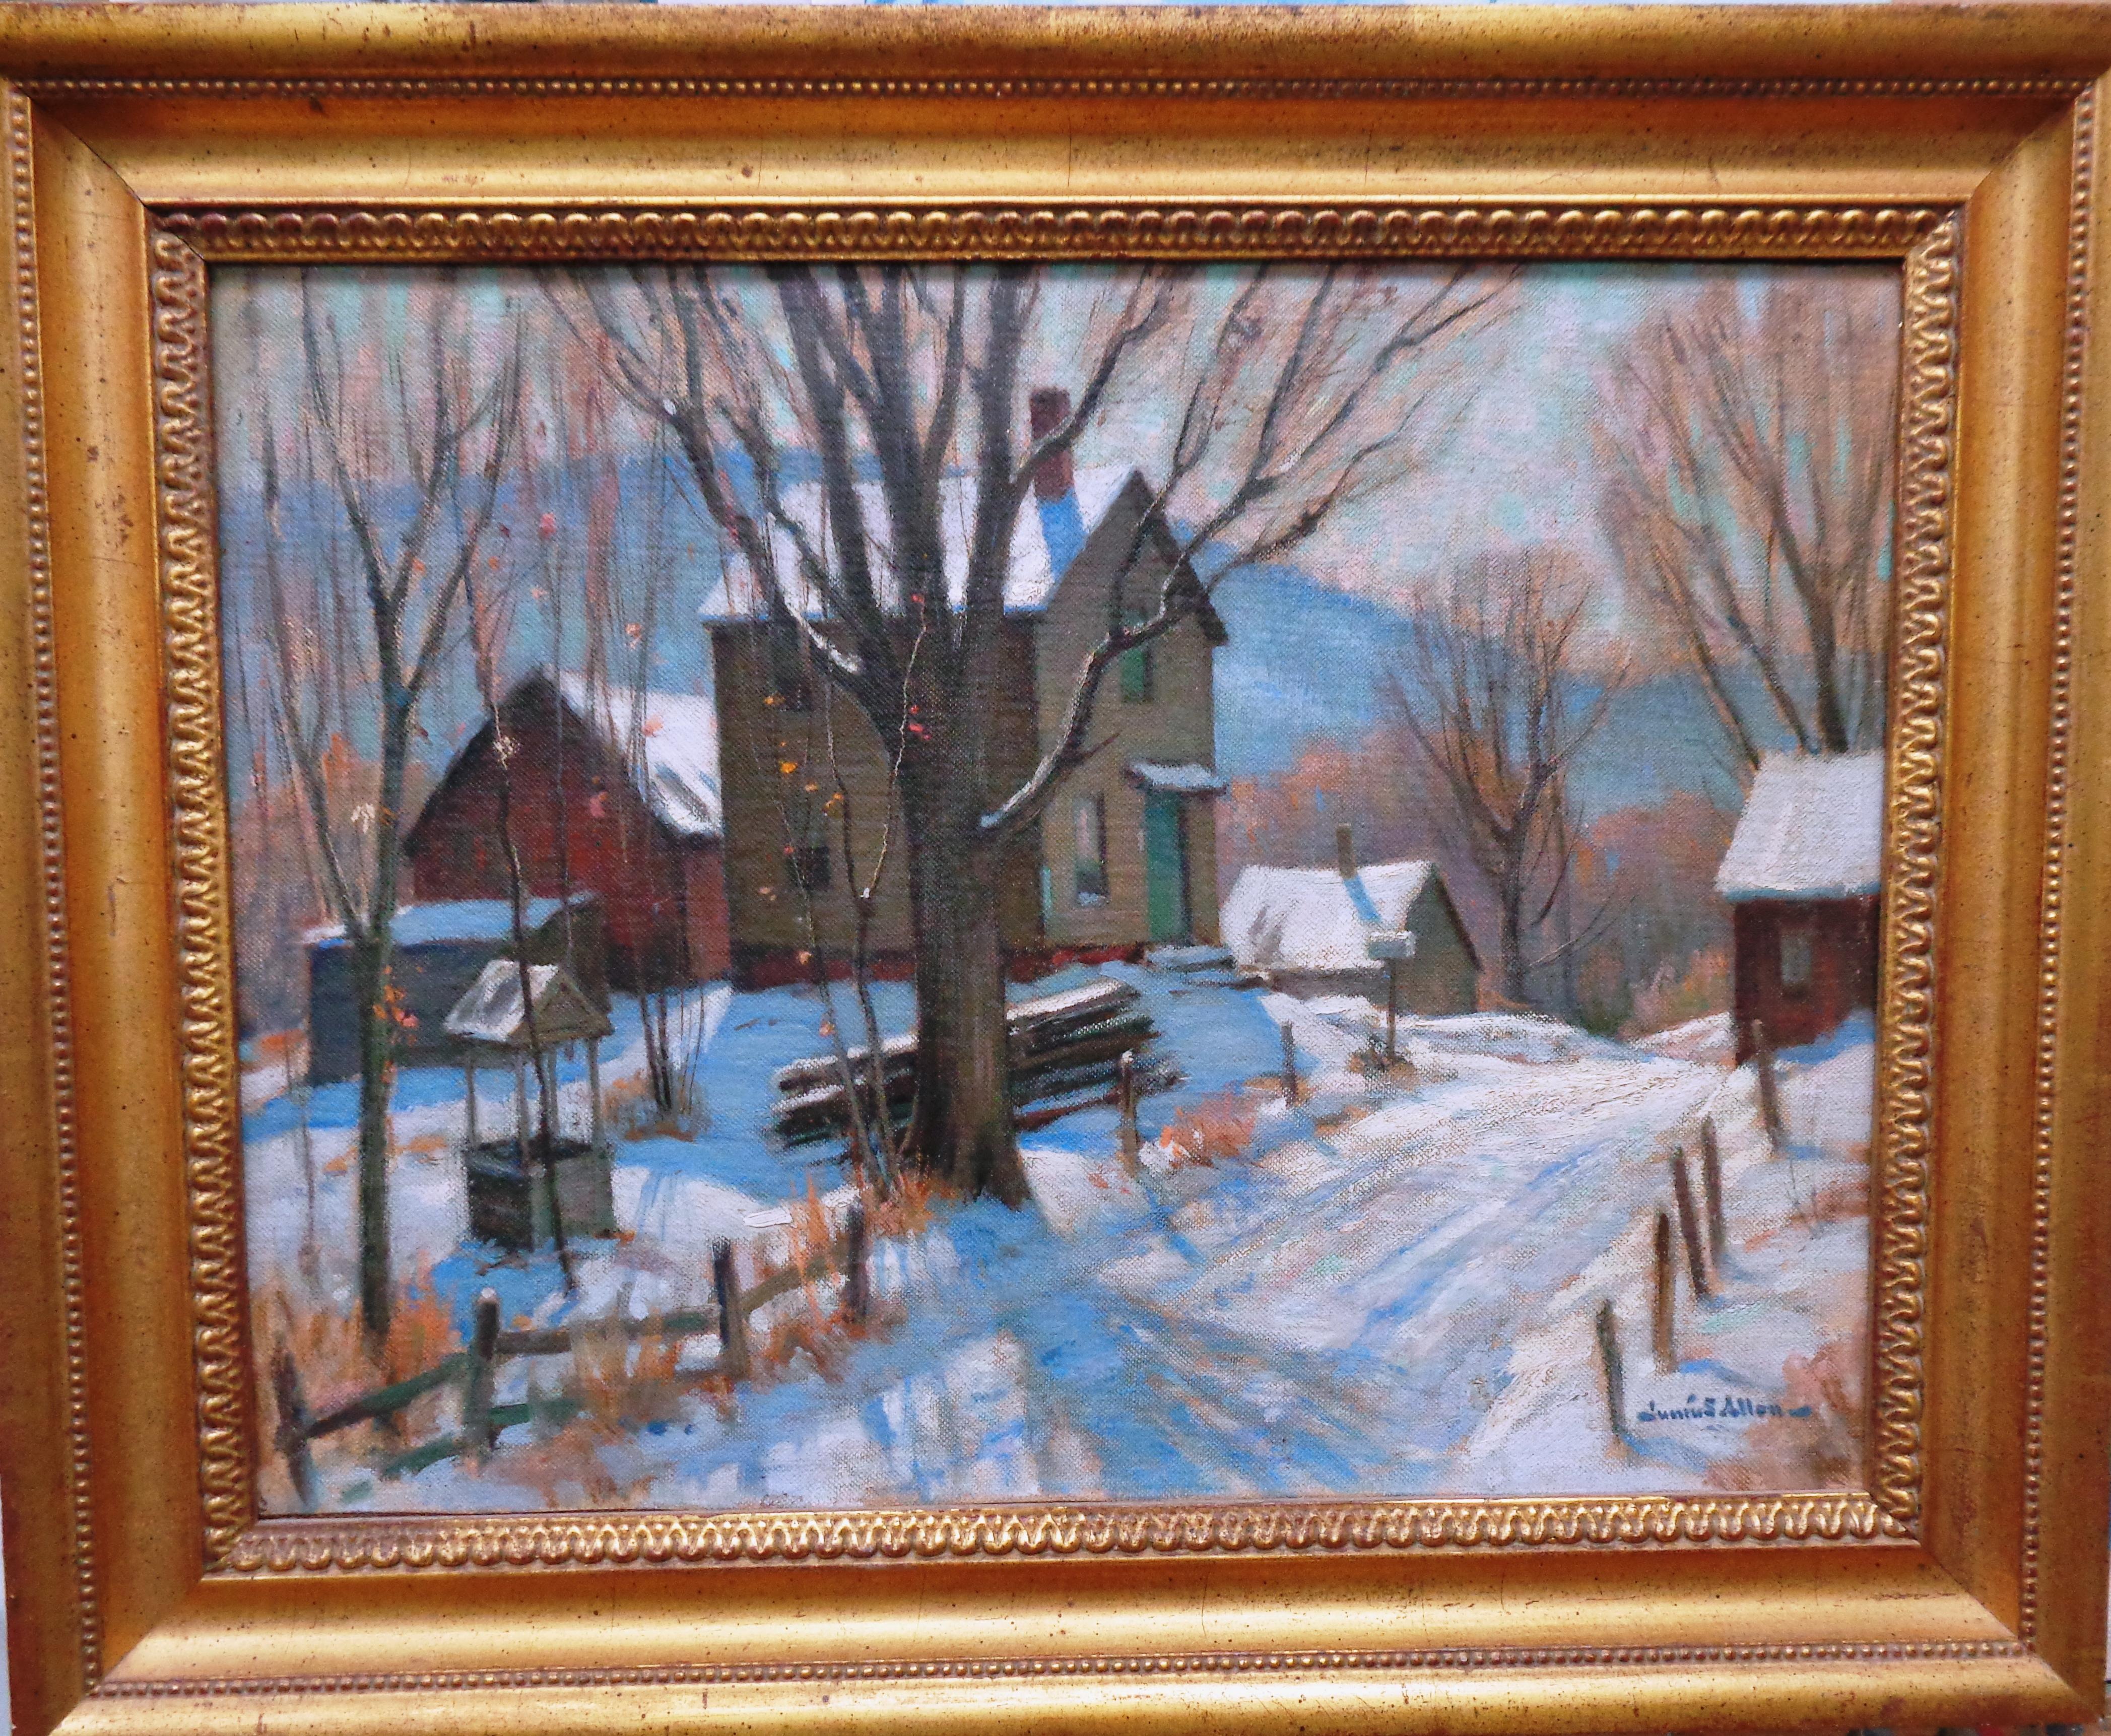 The Upland Road  oil on canvas  image is 12 x 16 Salmagundi Club Exhibition Label.
Painting is in as purchased condition  and has been relined. Frame shows minor wear.
Junius Allen, N.A. ( 1898-1962) was considered one of the most promising artists